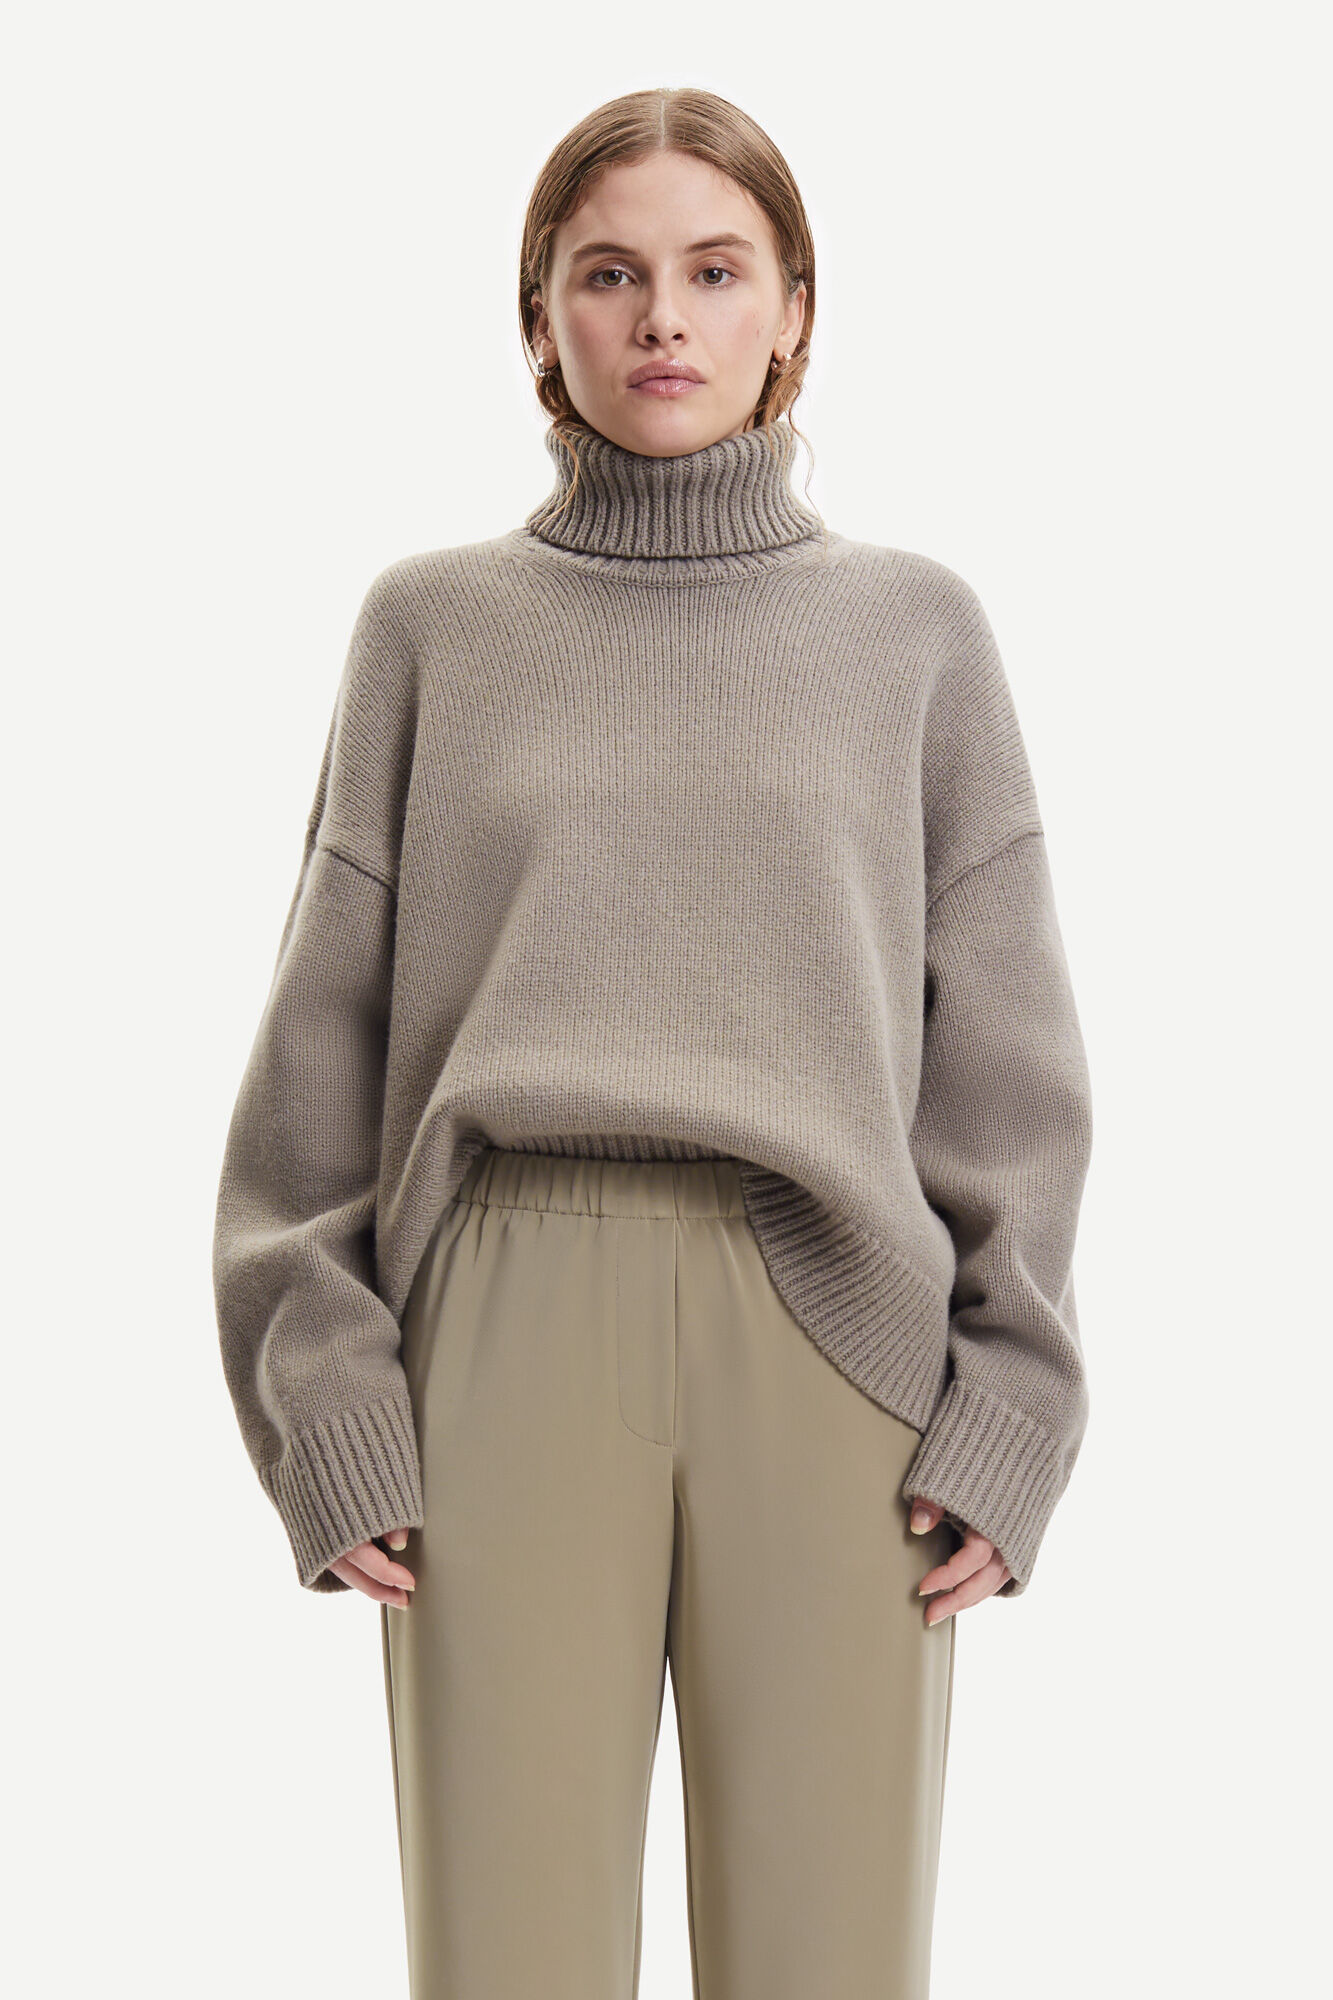 JOSEPH Wool Cardigan Stitch Zip Through Jumper in Camel Natural Womens Jumpers and knitwear JOSEPH Jumpers and knitwear 